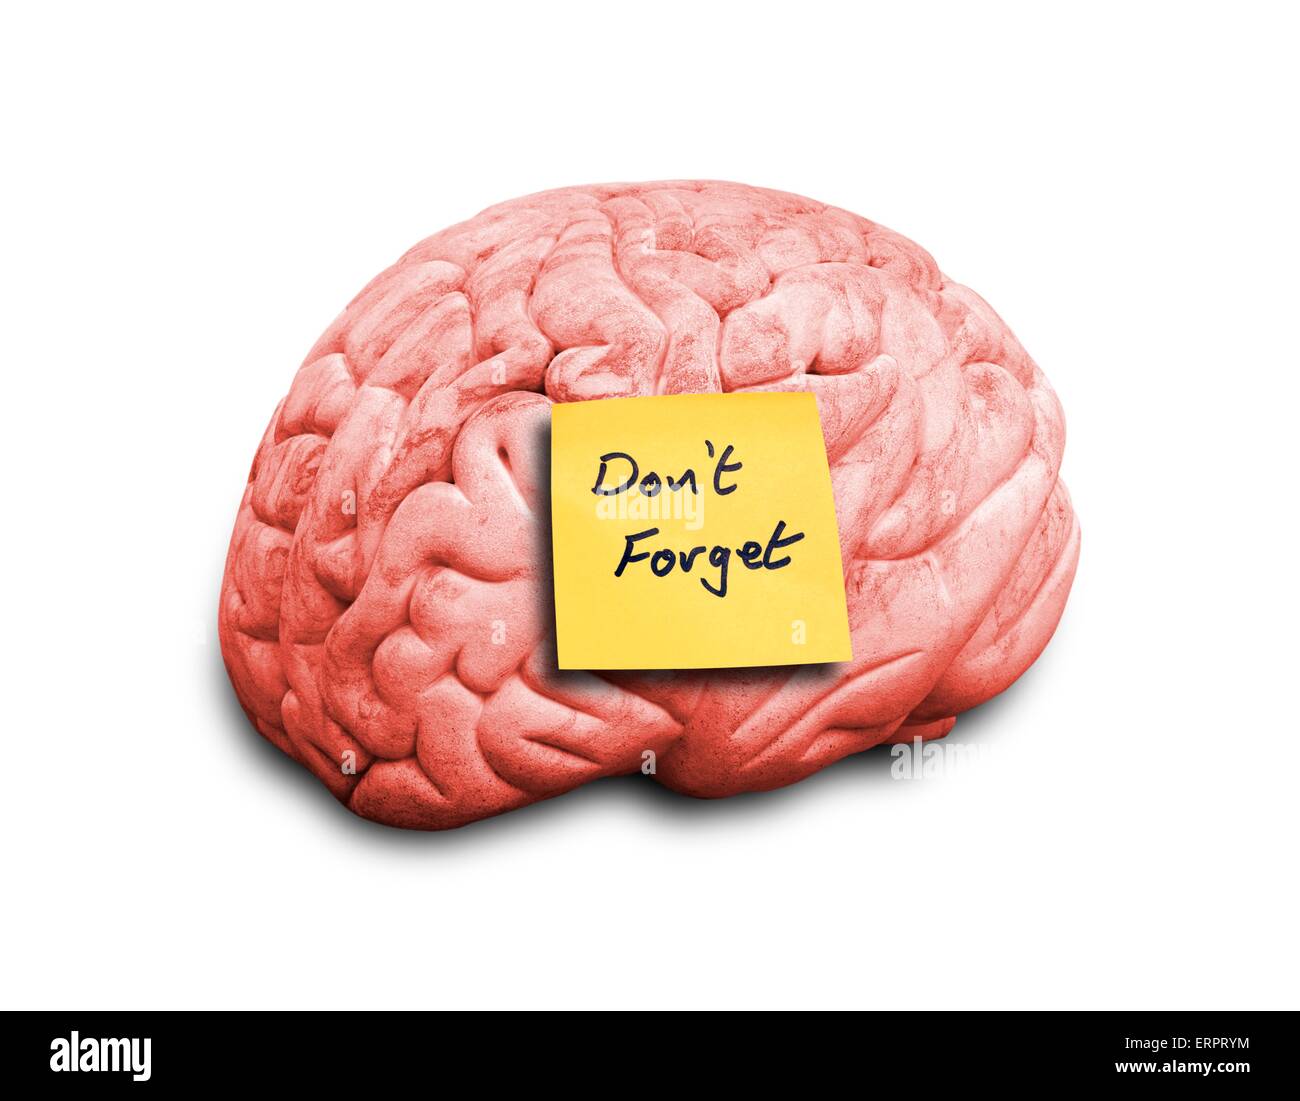 Human brain with an adhesive note, computer artwork. Stock Photo